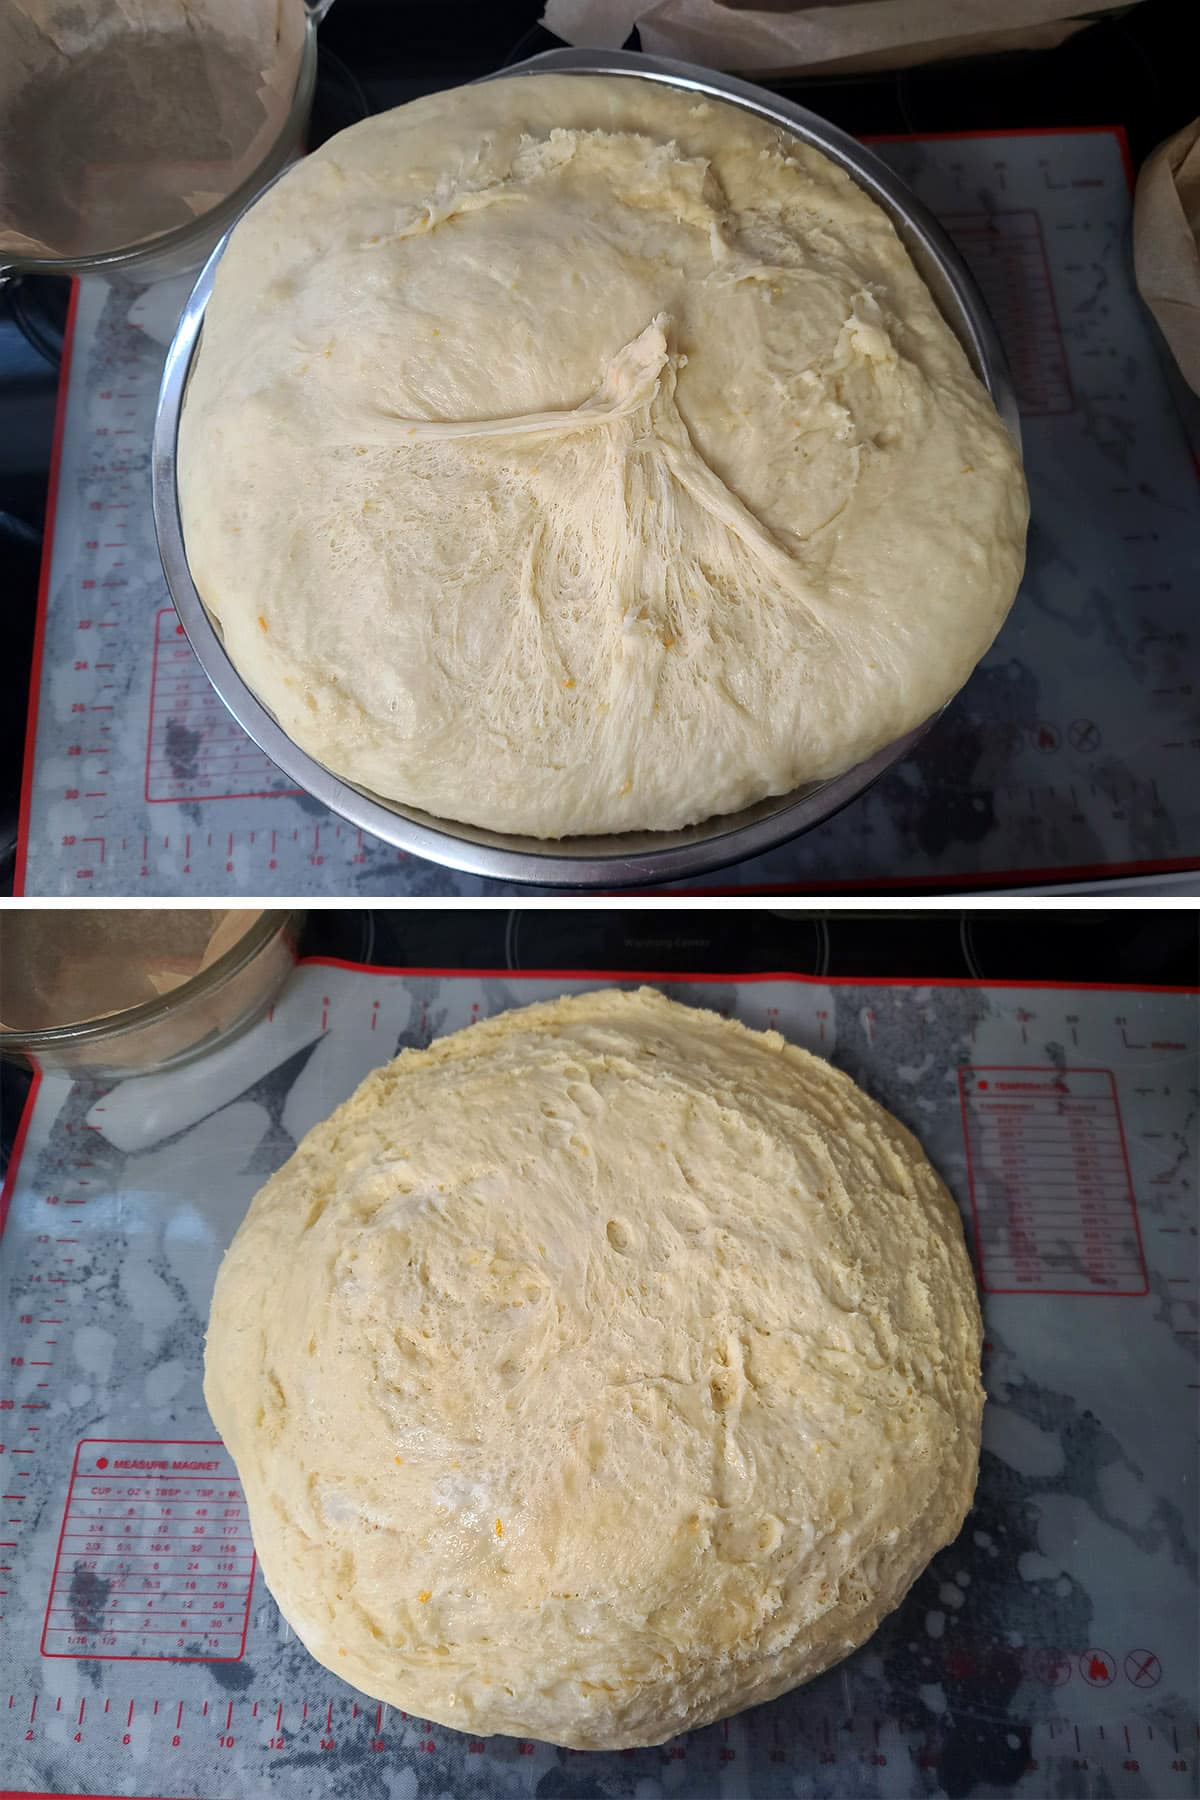 A 2 part image showing the dough almost overflowing the large metal bowl, the dumped out on the work surface.